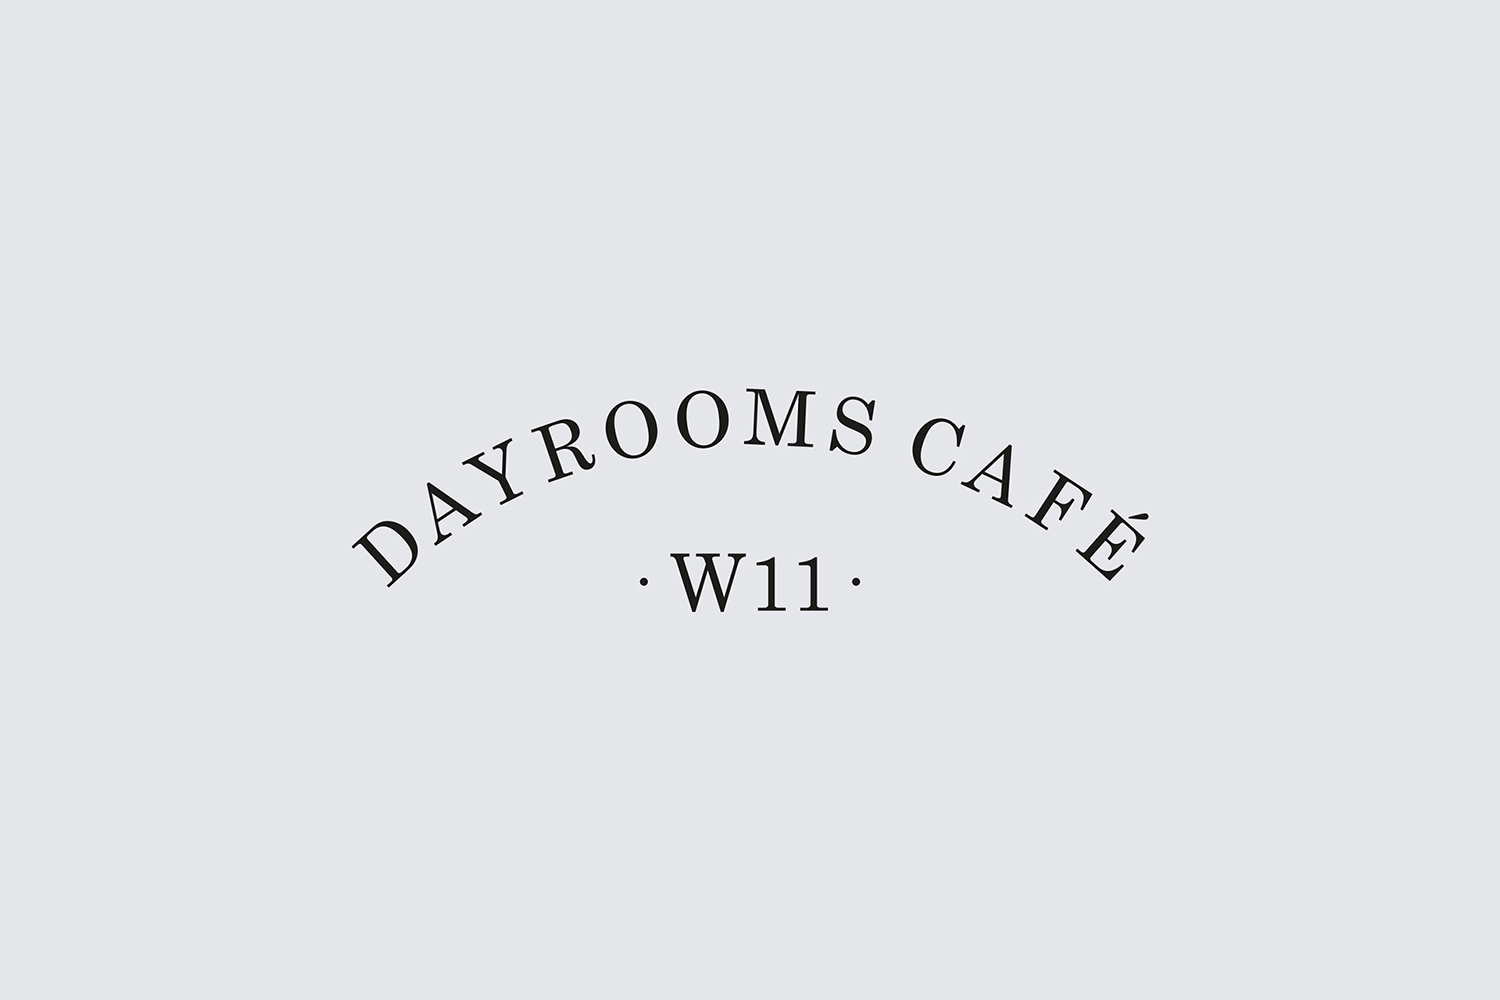 Creative Logotype Gallery & Inspiration: The Dayrooms Cafe by Two Times Elliott, United Kingdom